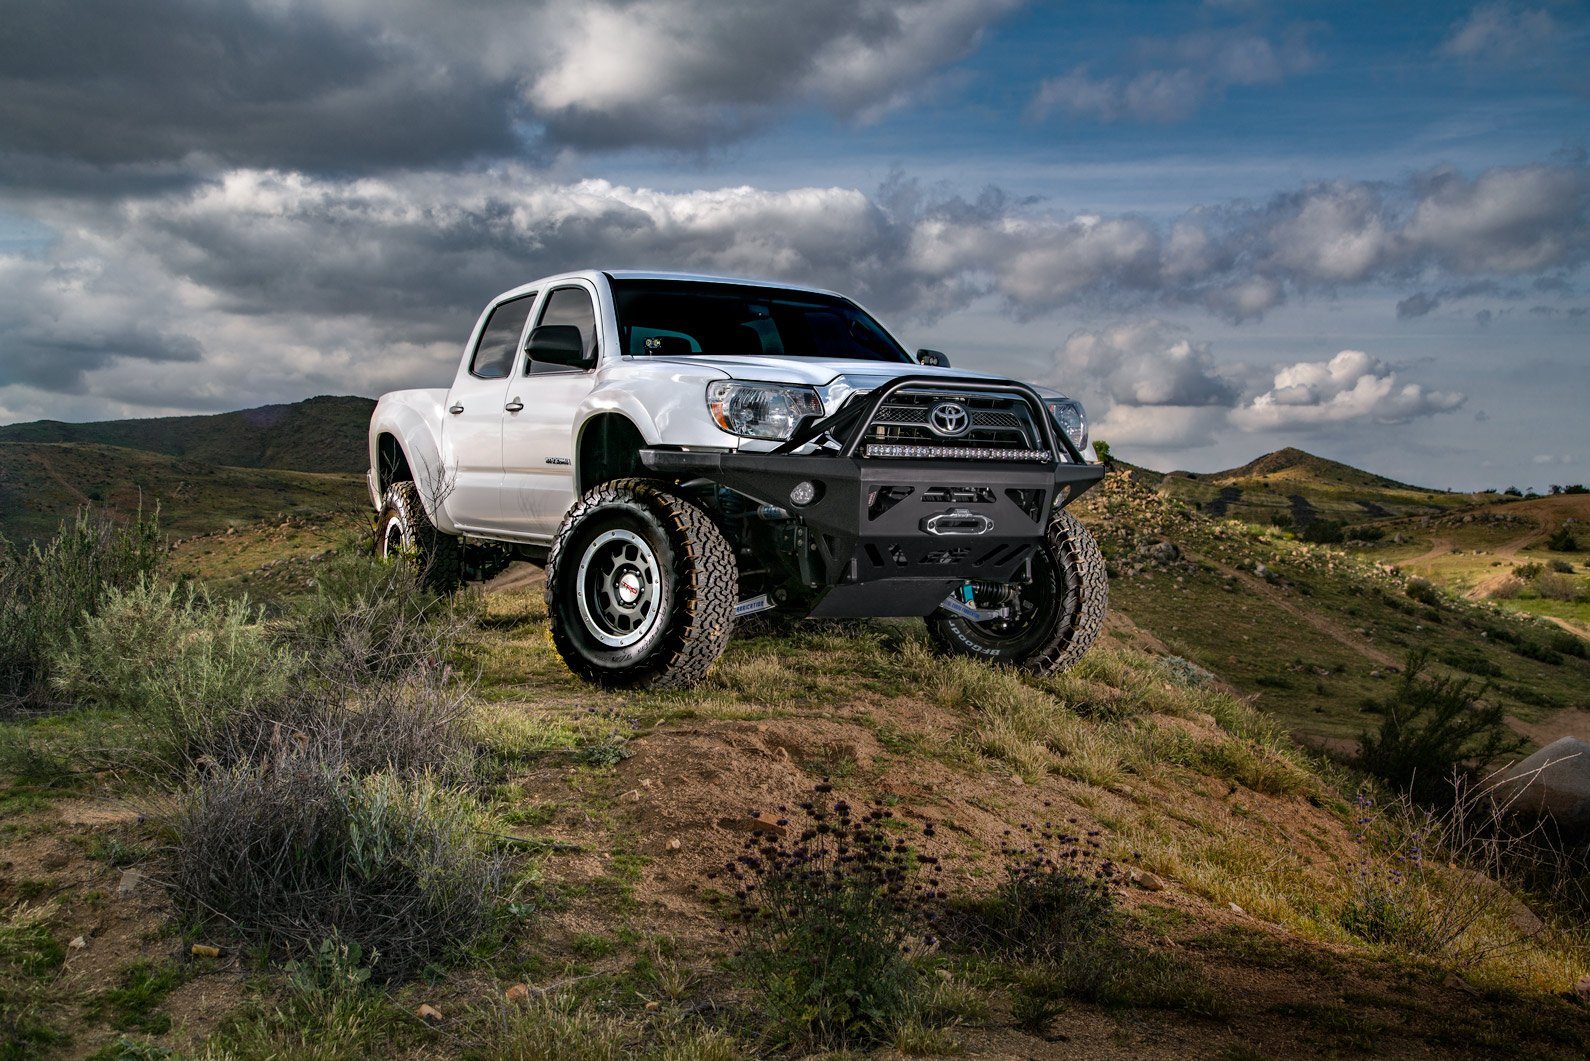 ’05-15 Toyota Tacoma Prerunner/4WD Race Series +3.5" Long Travel Kit Suspension Total Chaos Fabrication 